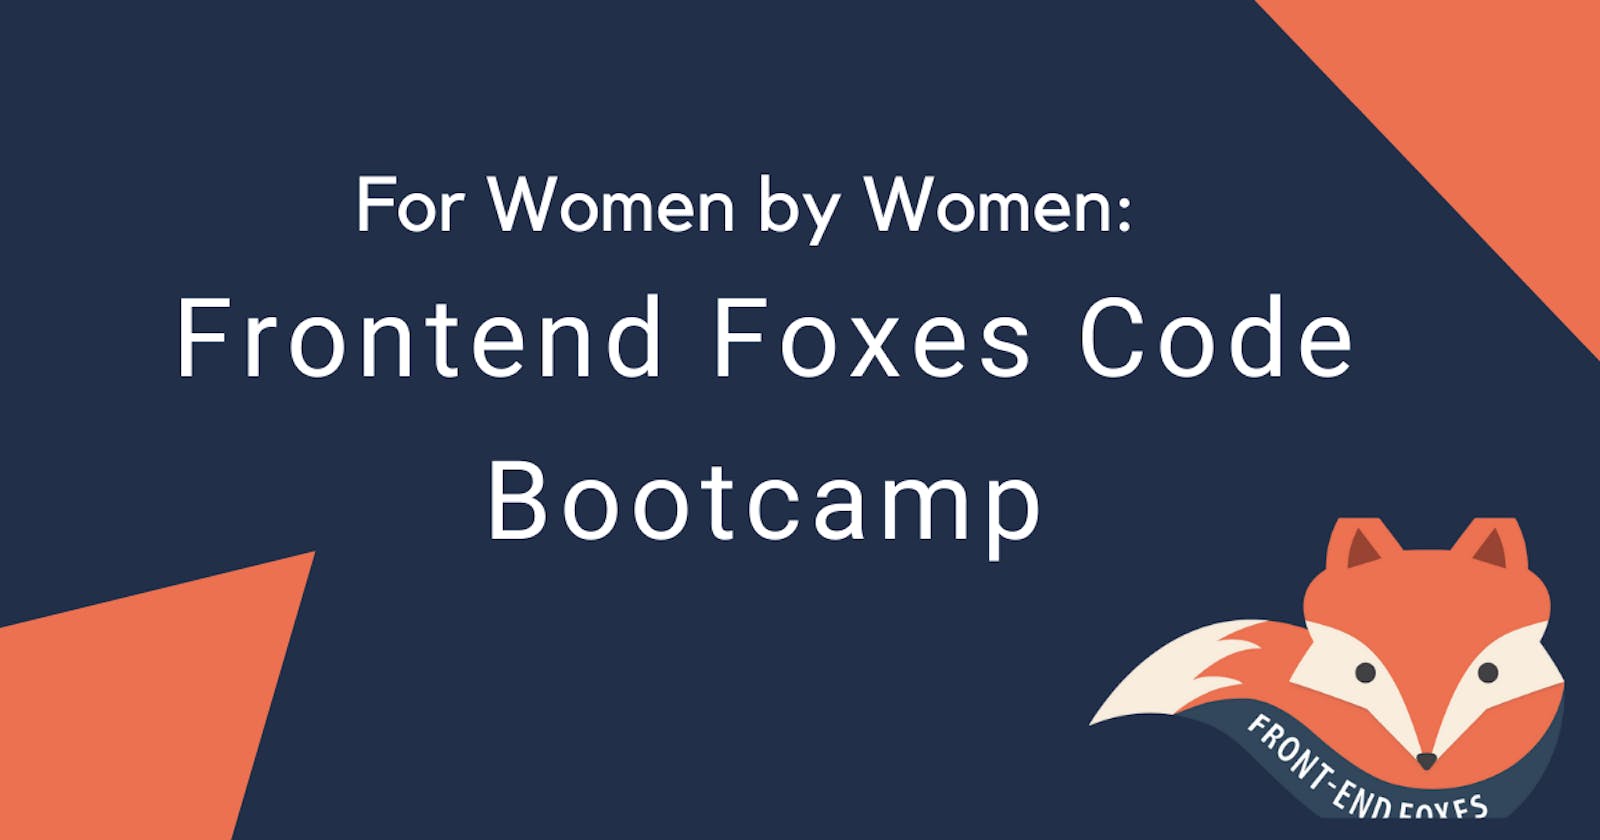 For Women by Women: My experience as an Instructor for the Frontend Foxes Code Bootcamp